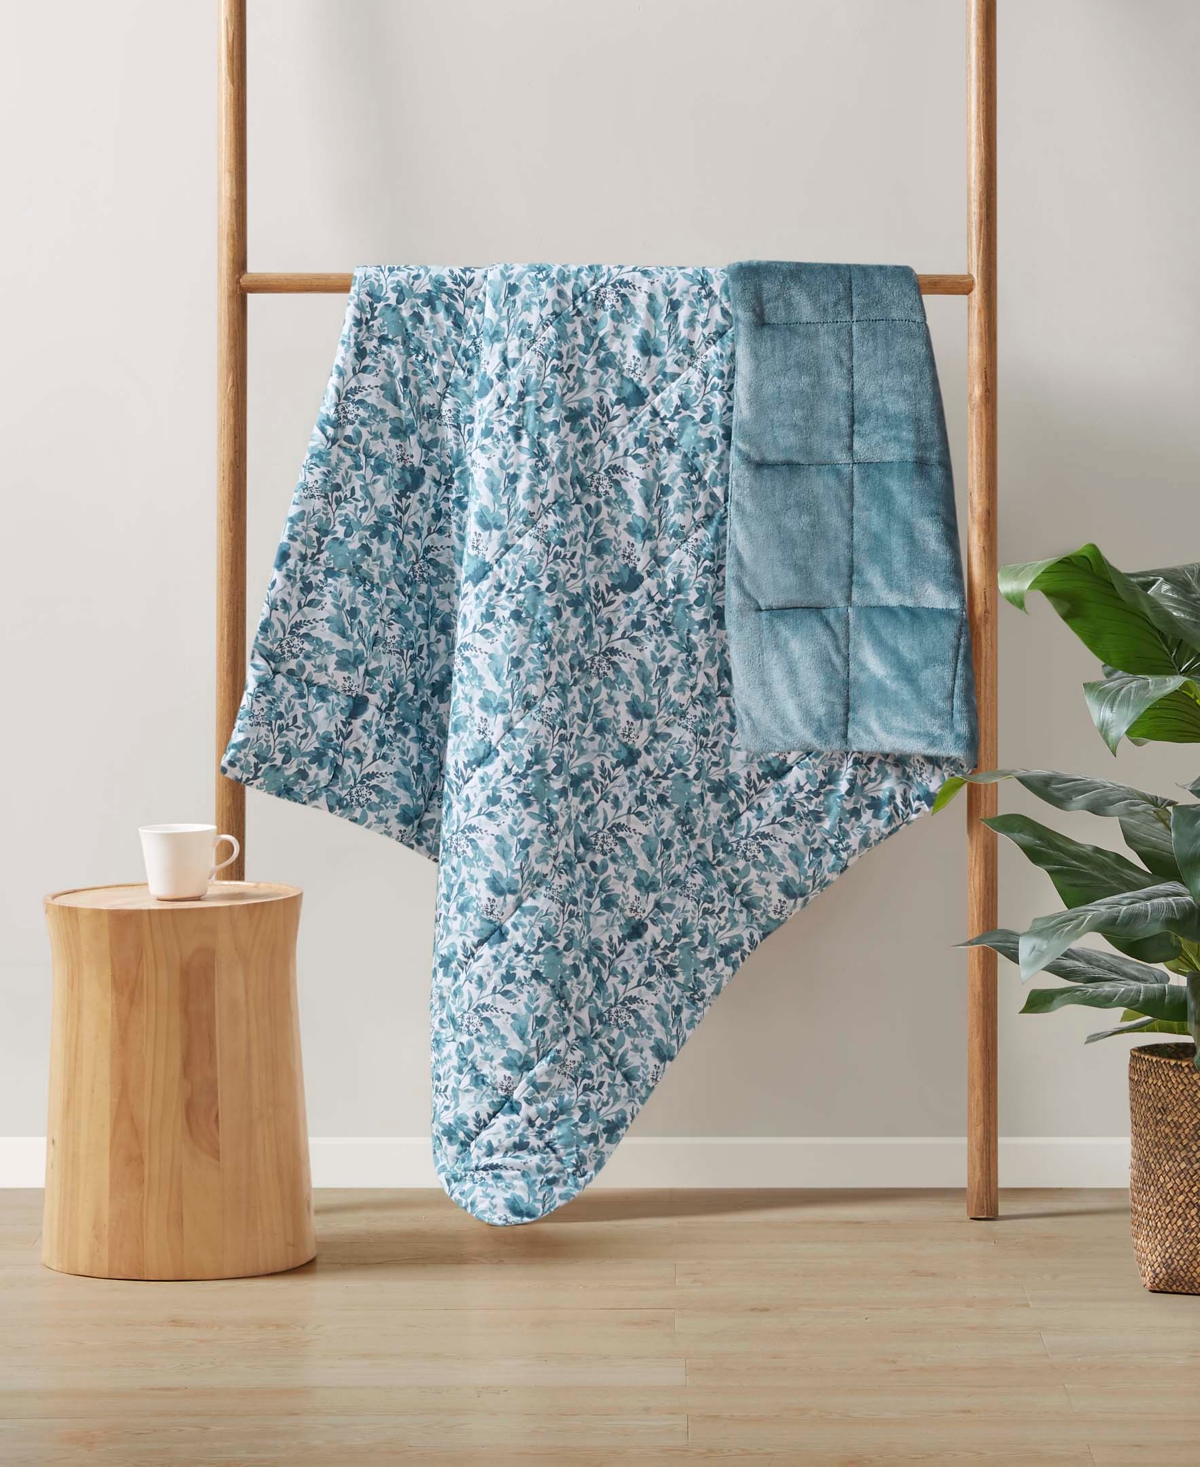 Clean Spaces Quilted Throw, 50" X 60" In Floral Teal